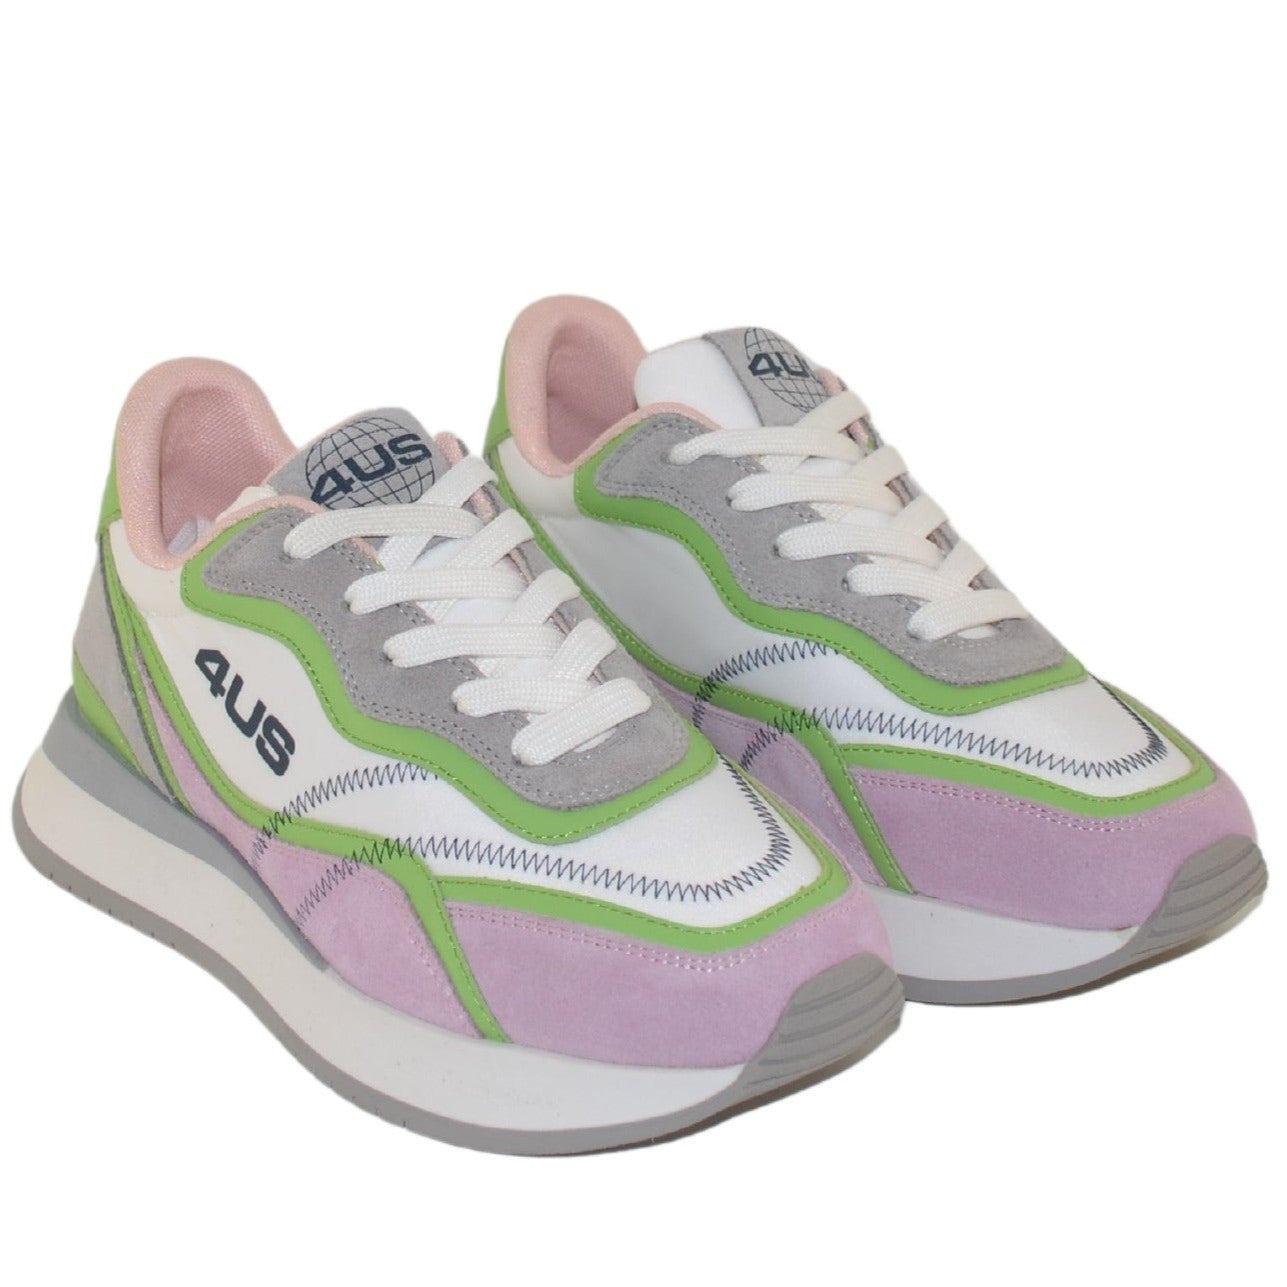 Sneakers Cesare Paciotti 4us white fabric rose and green leather